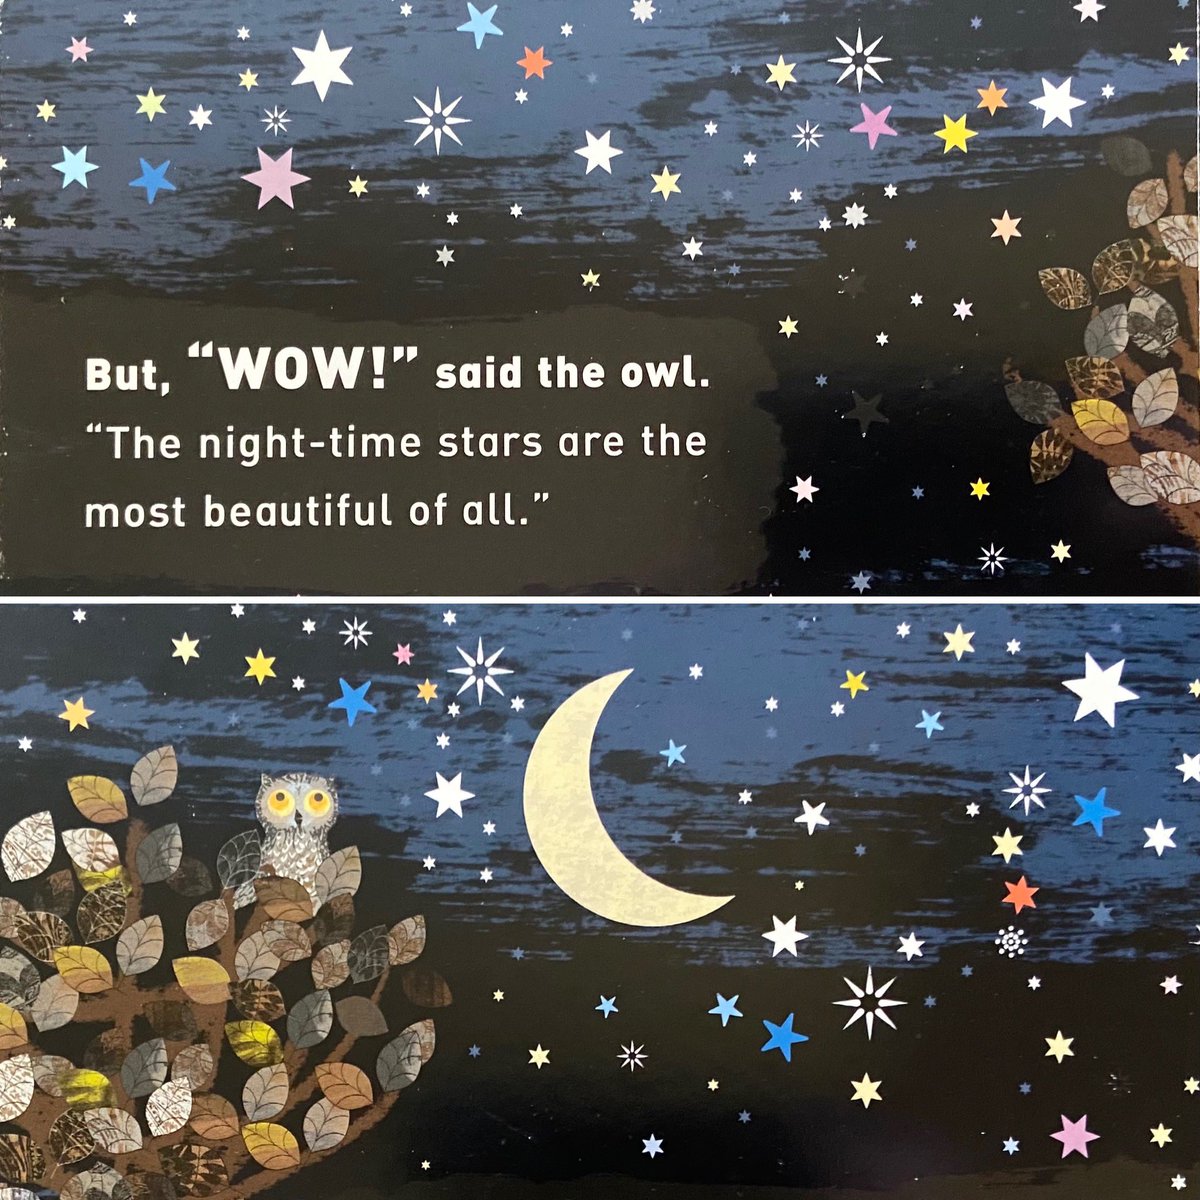 Seeing NASA’s photos from James Webb Space Telescope, I was reminded of some very wise words from @TimHopgood’s ‘Wow! said the Owl’ accompanied by his beautiful illustrations that really do capture the colours of the distant cosmos.